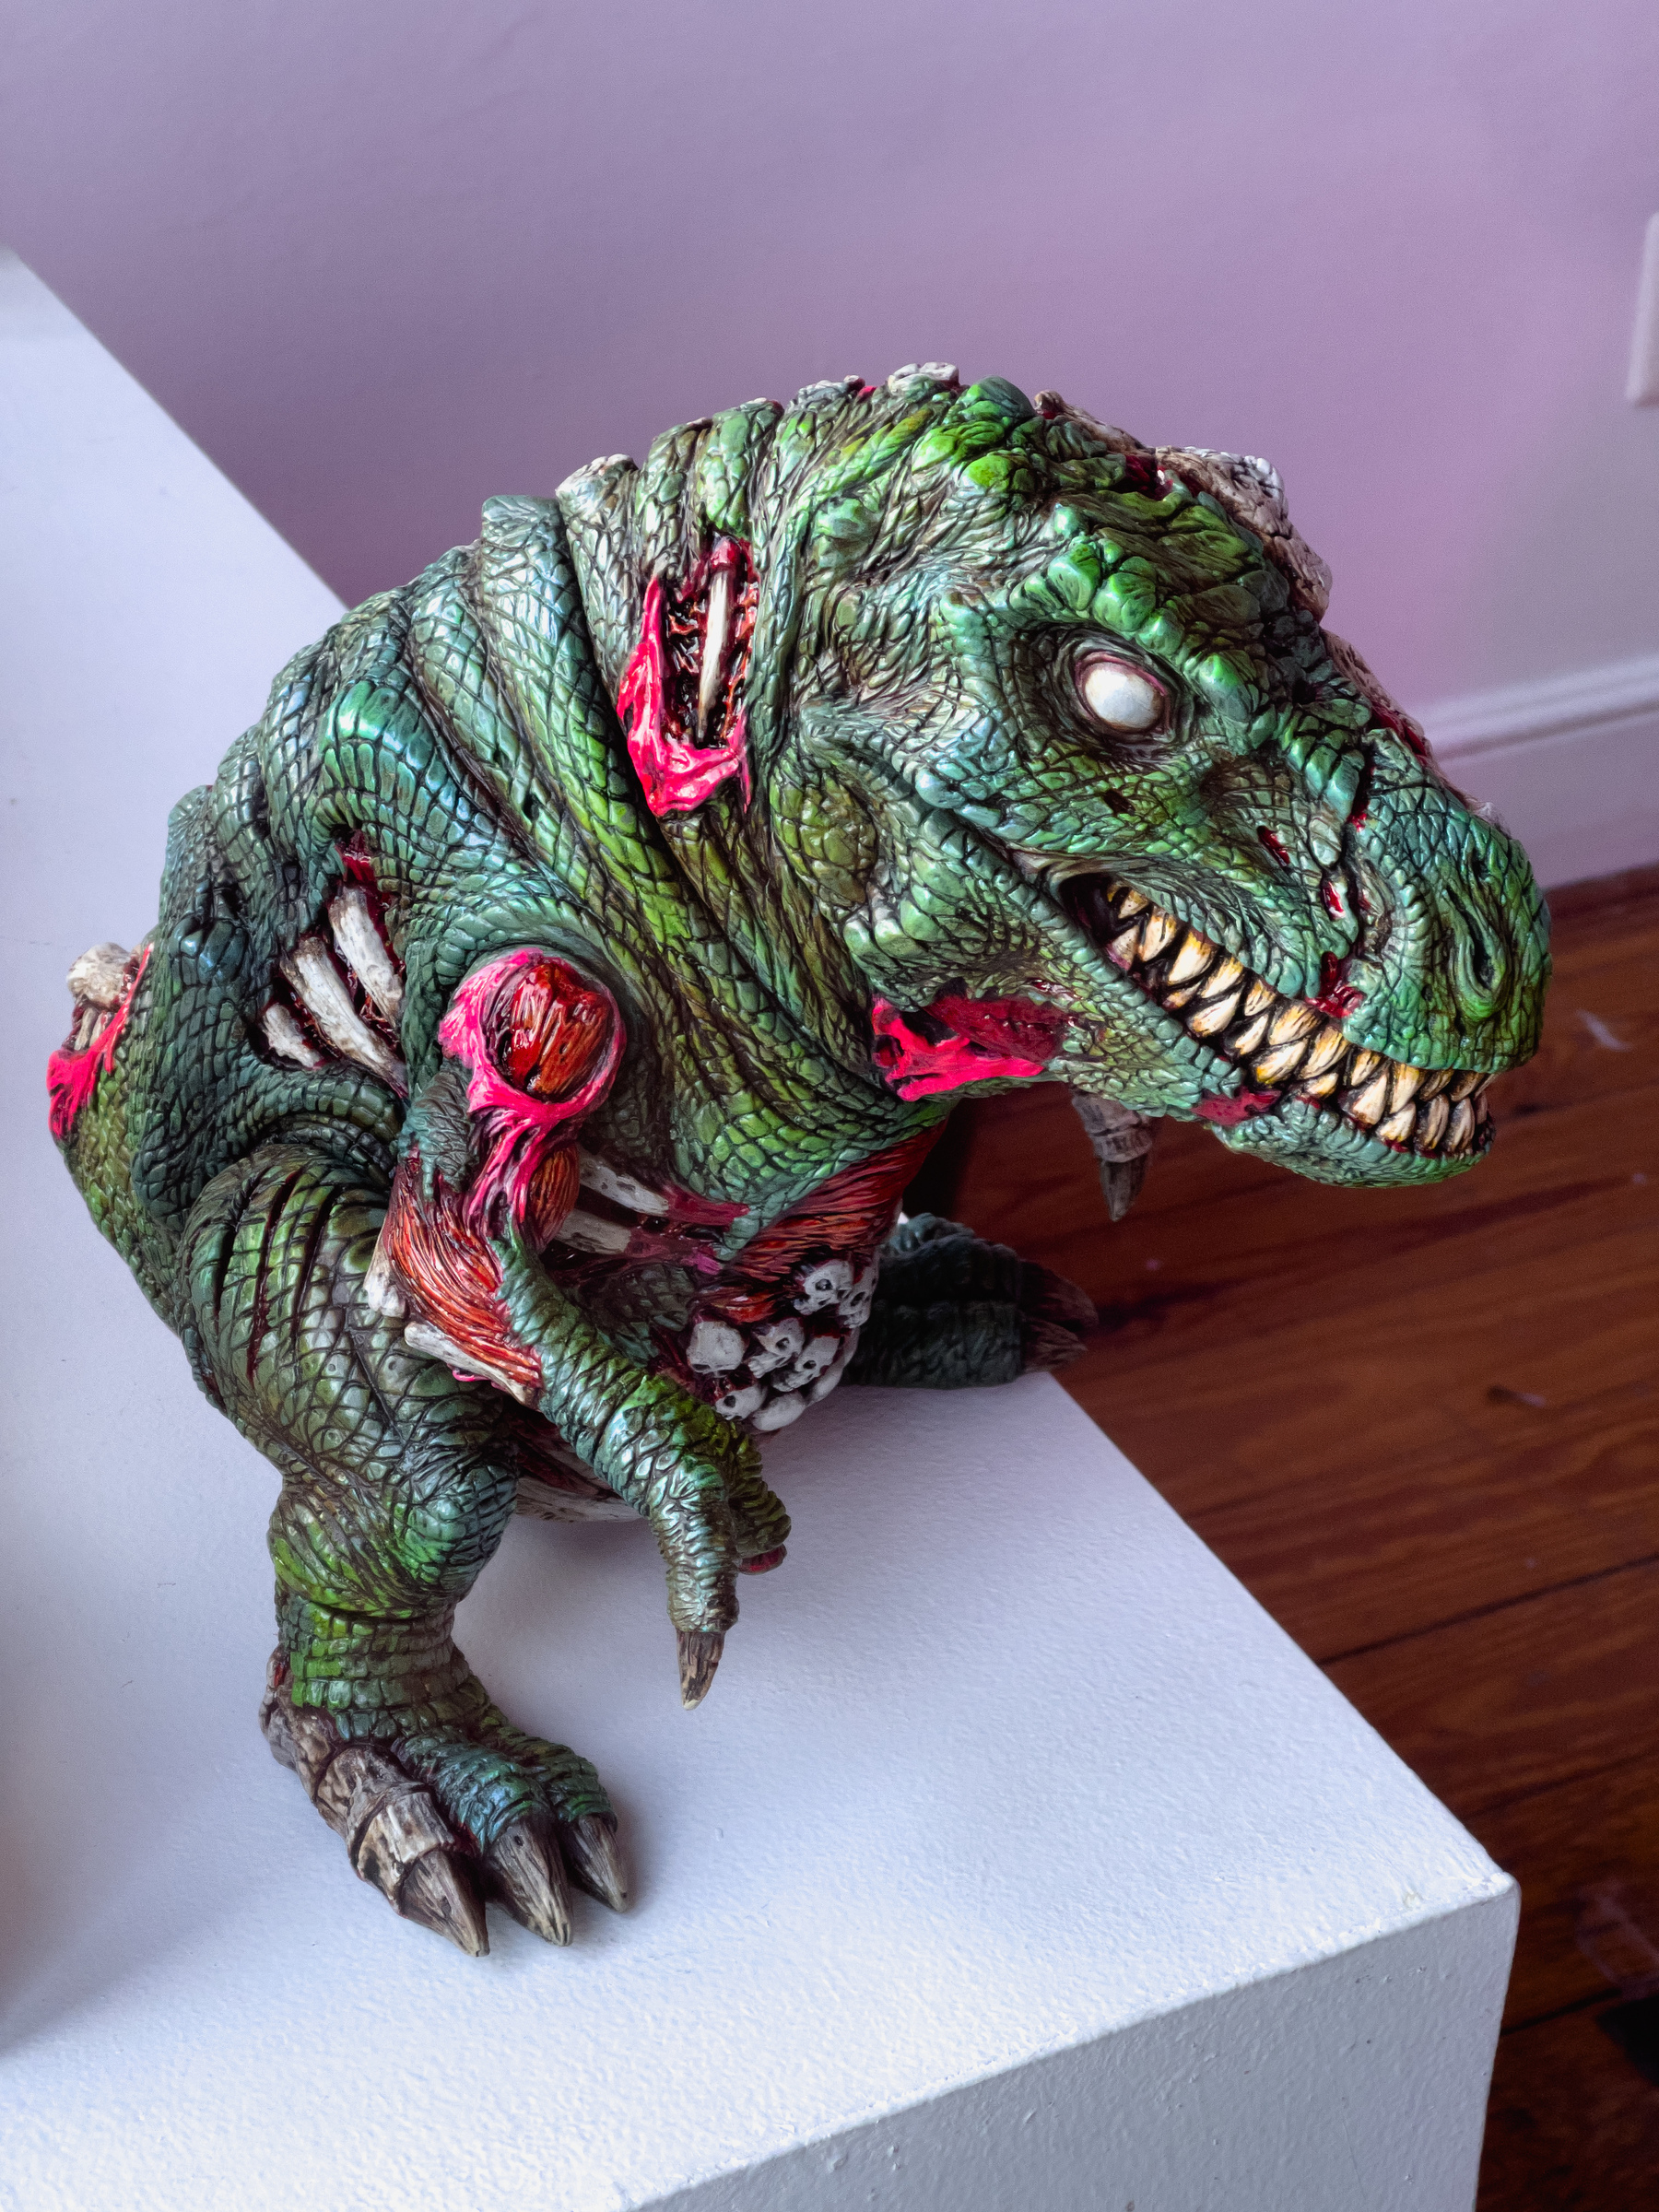 T Rex type dinosaur plastic toy in a high end gallery show.